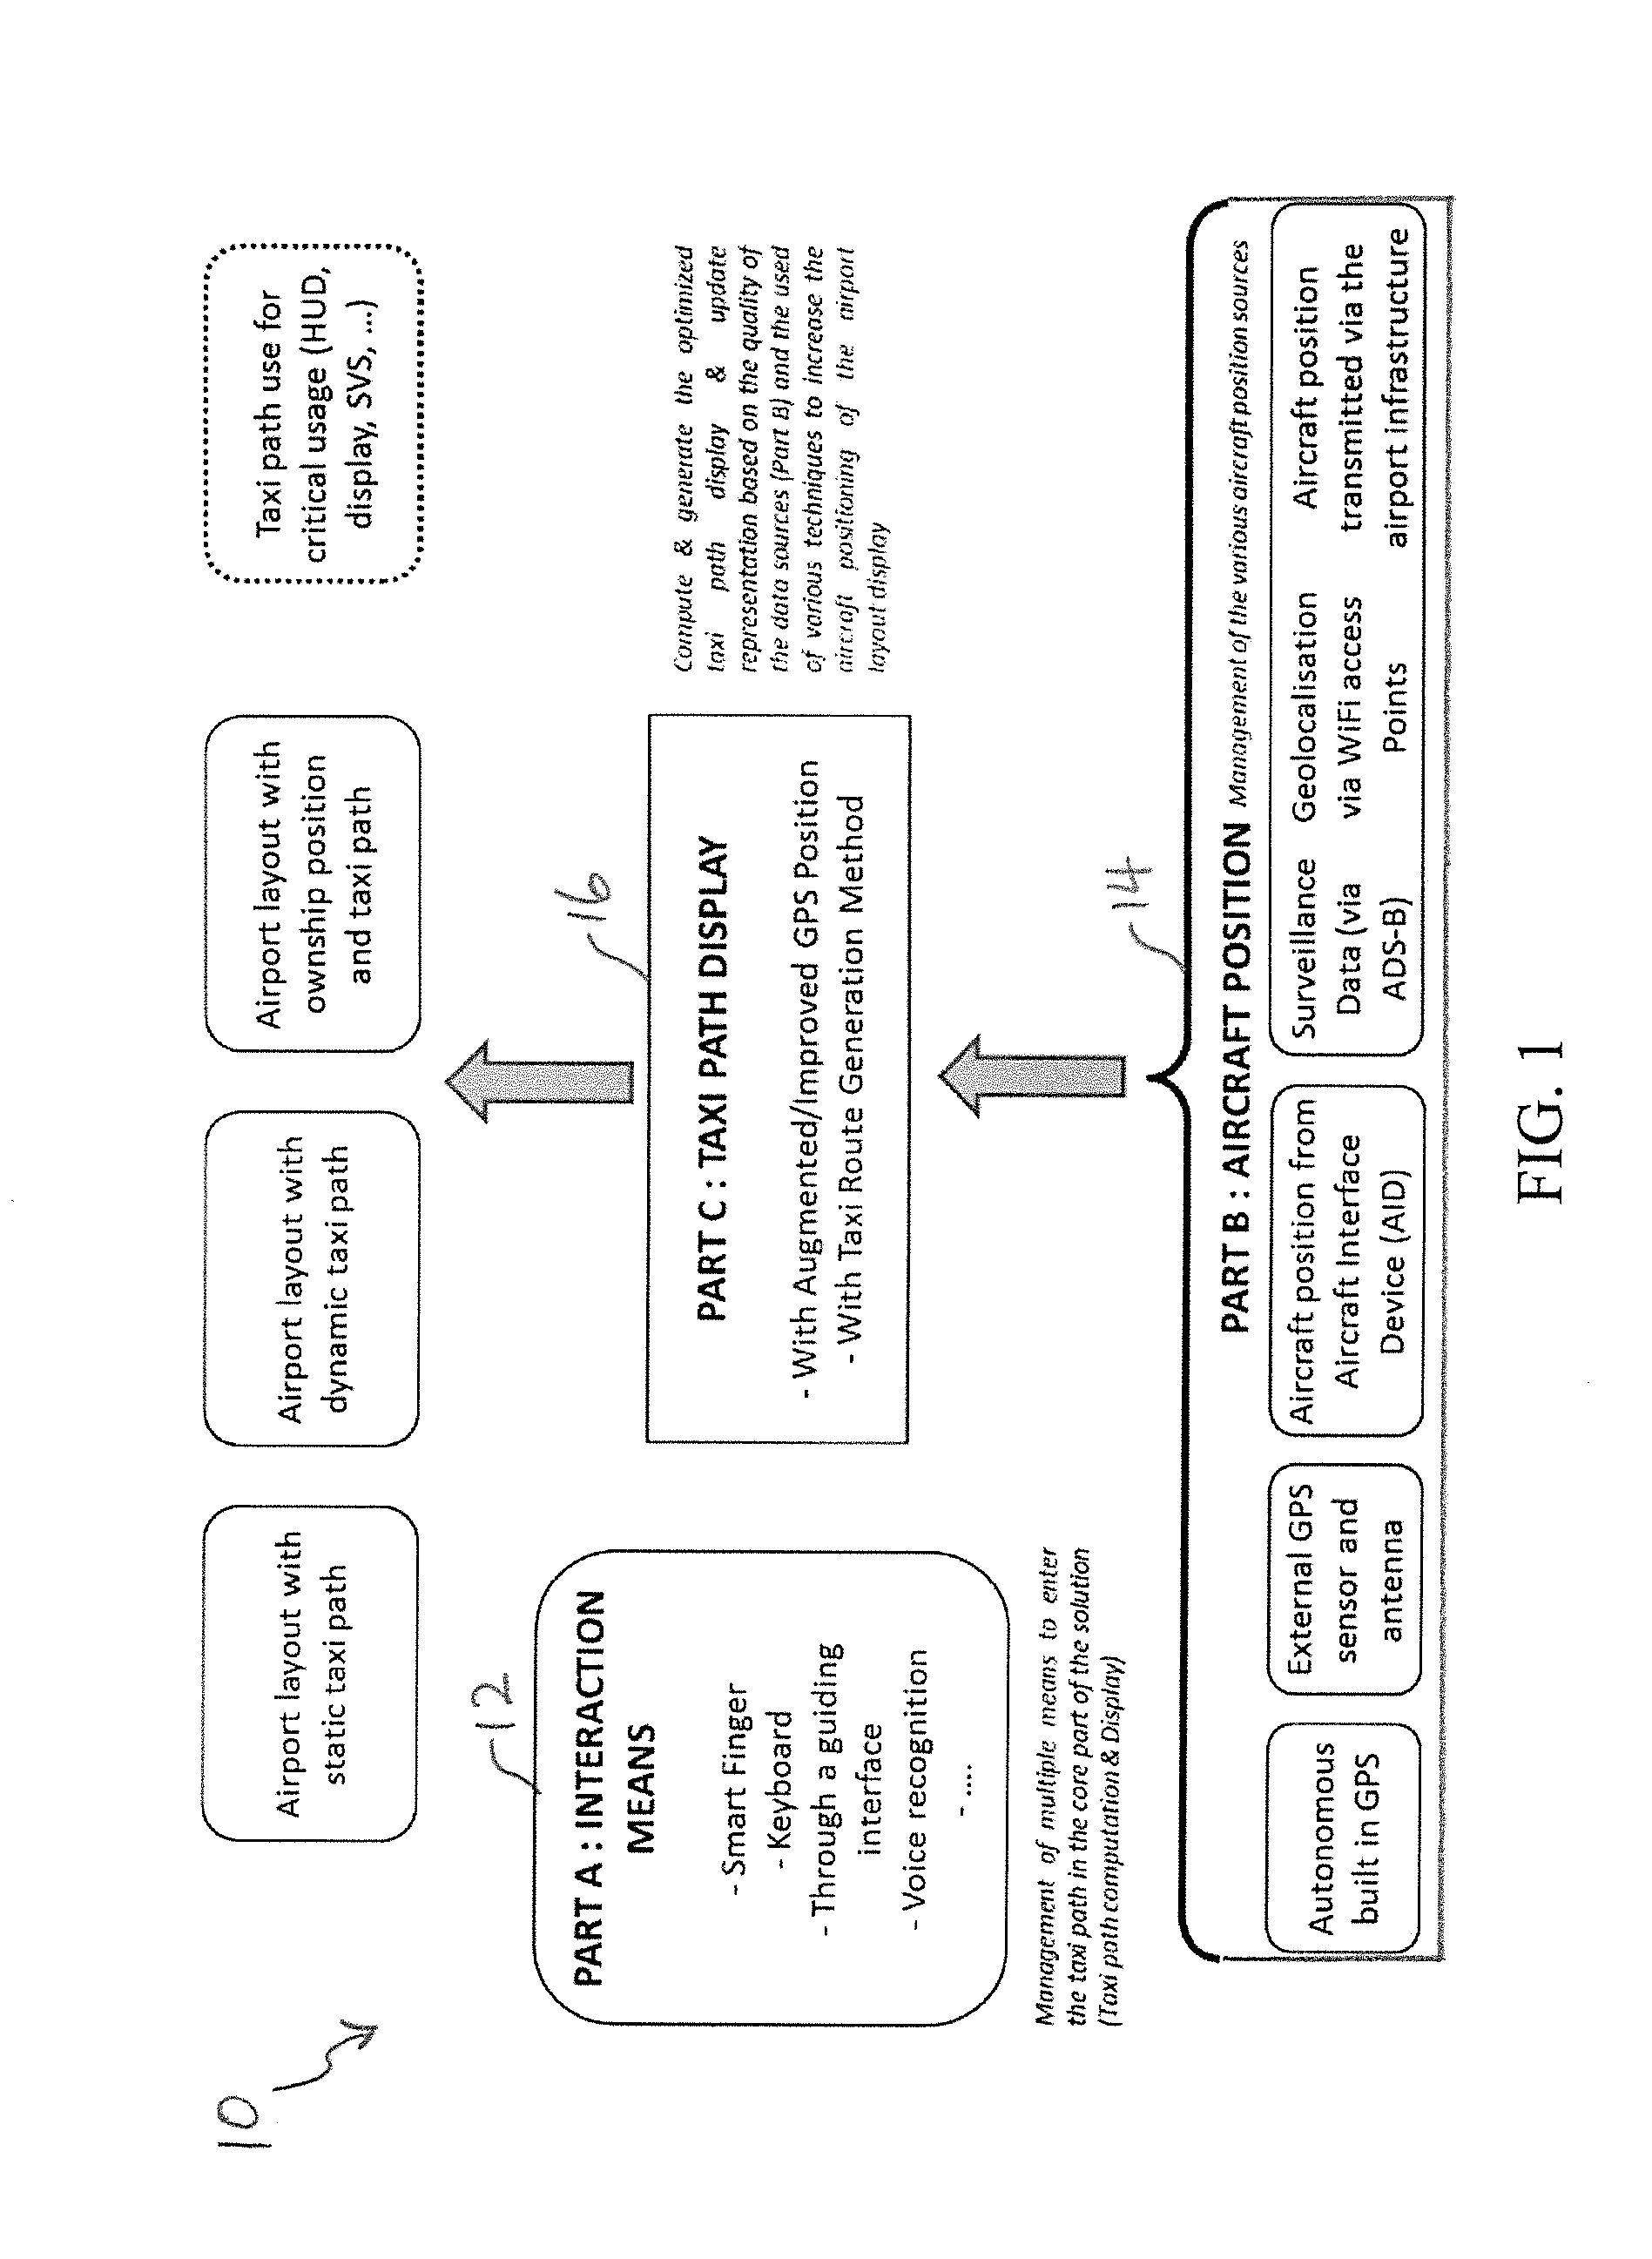 Systems and methods for providing optimized taxiing path operation for an aircraft